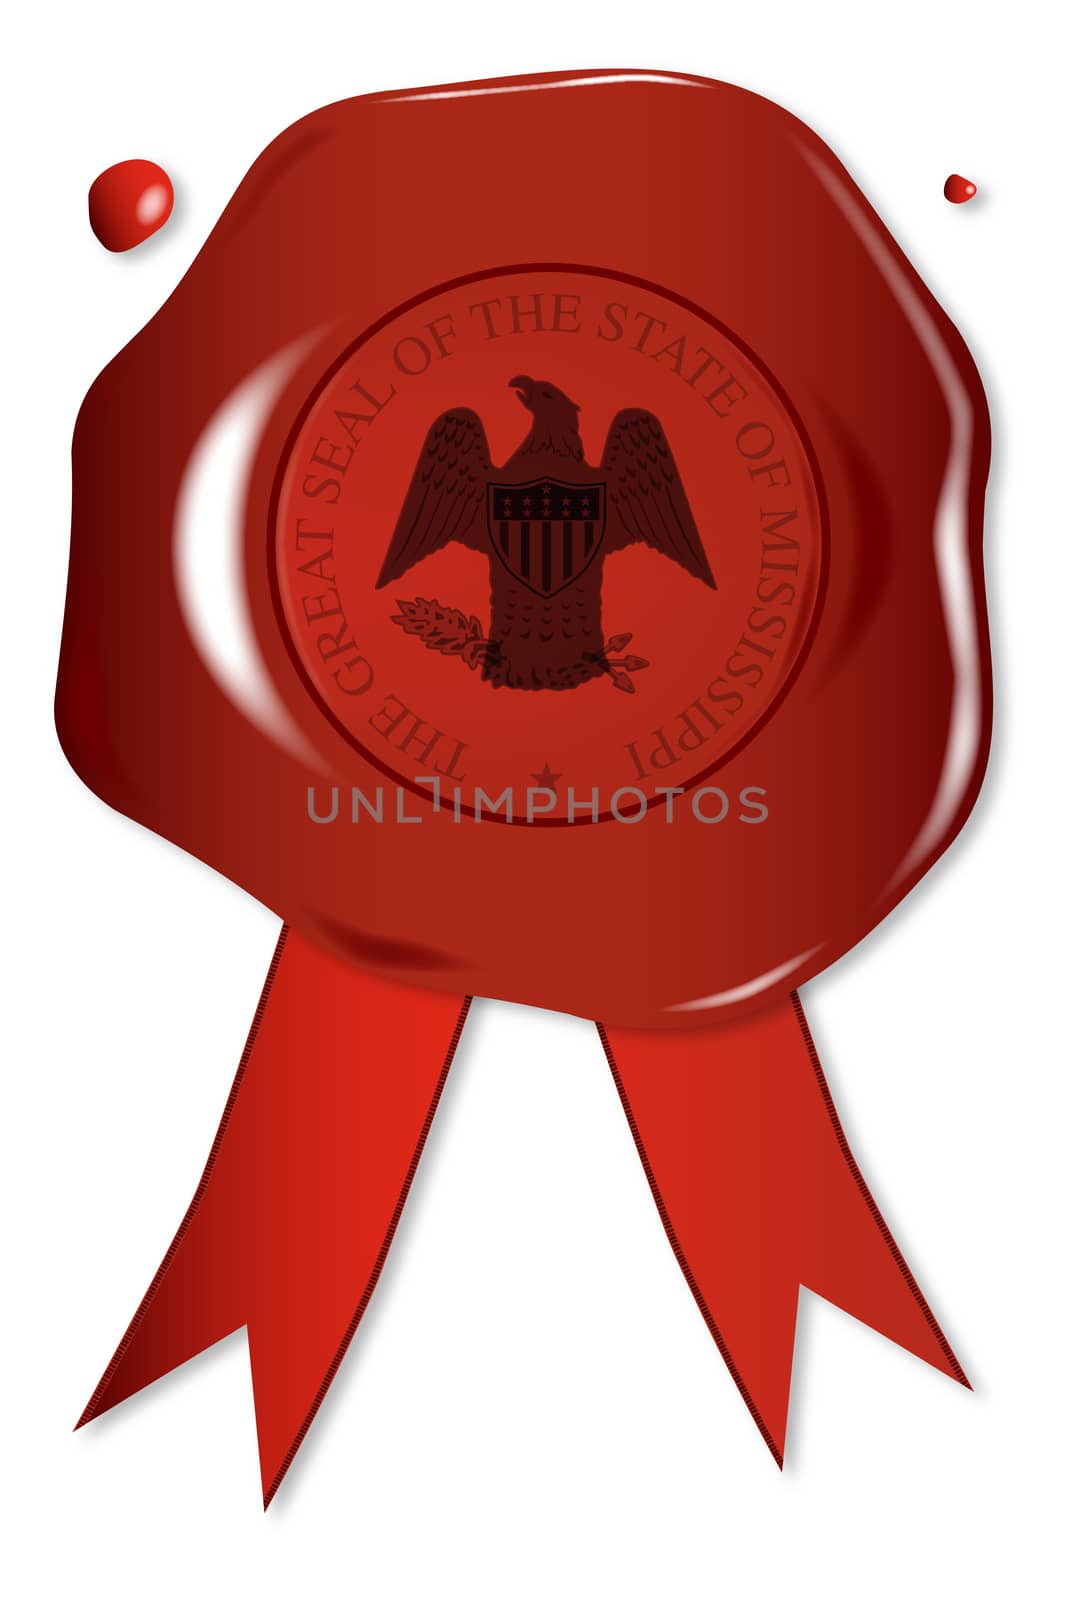 A wax seal with a the state seal of Mississippi